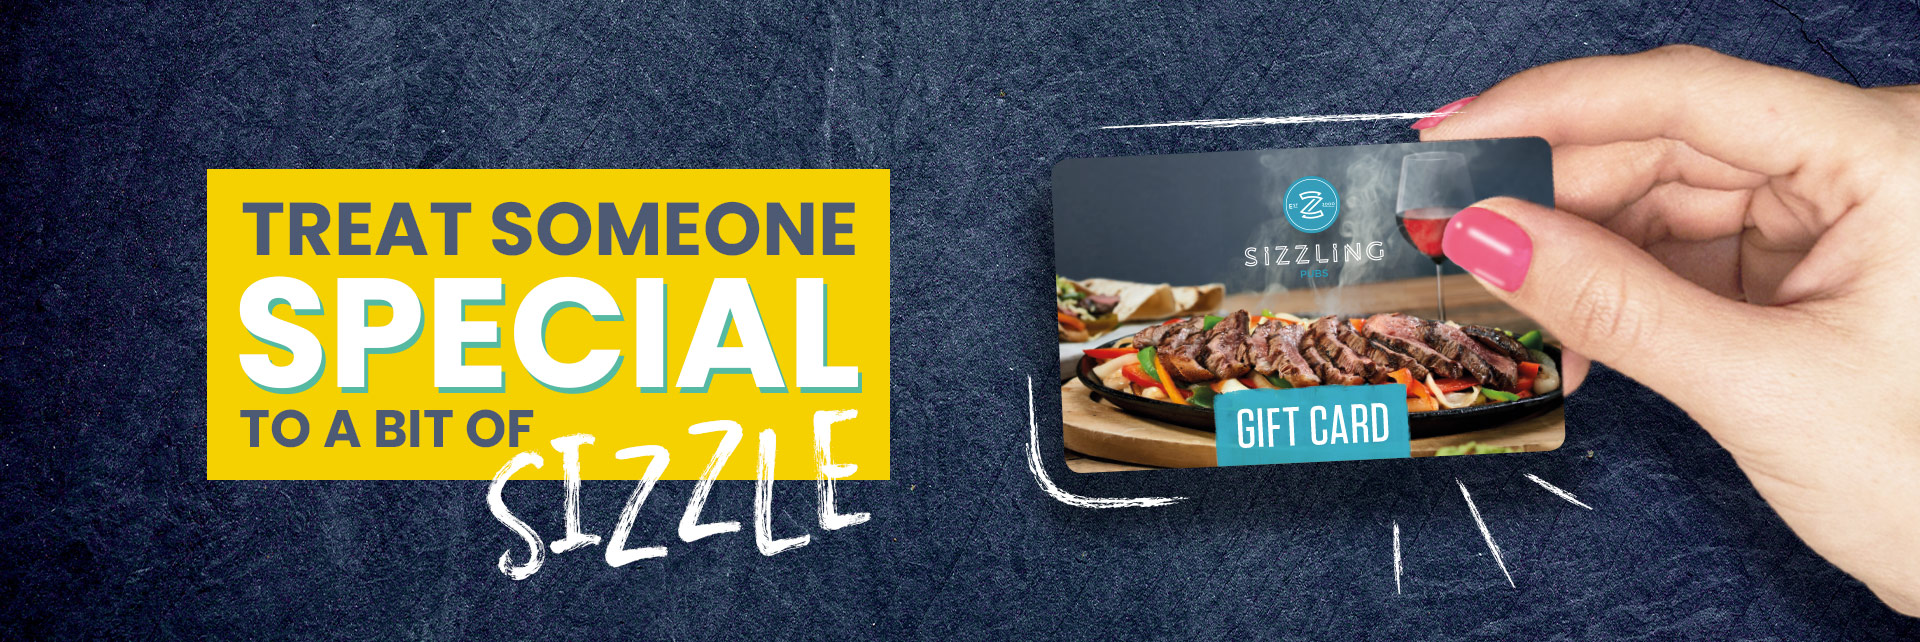 Sizzling Pubs Gift Card at The Myvod in Wednesbury